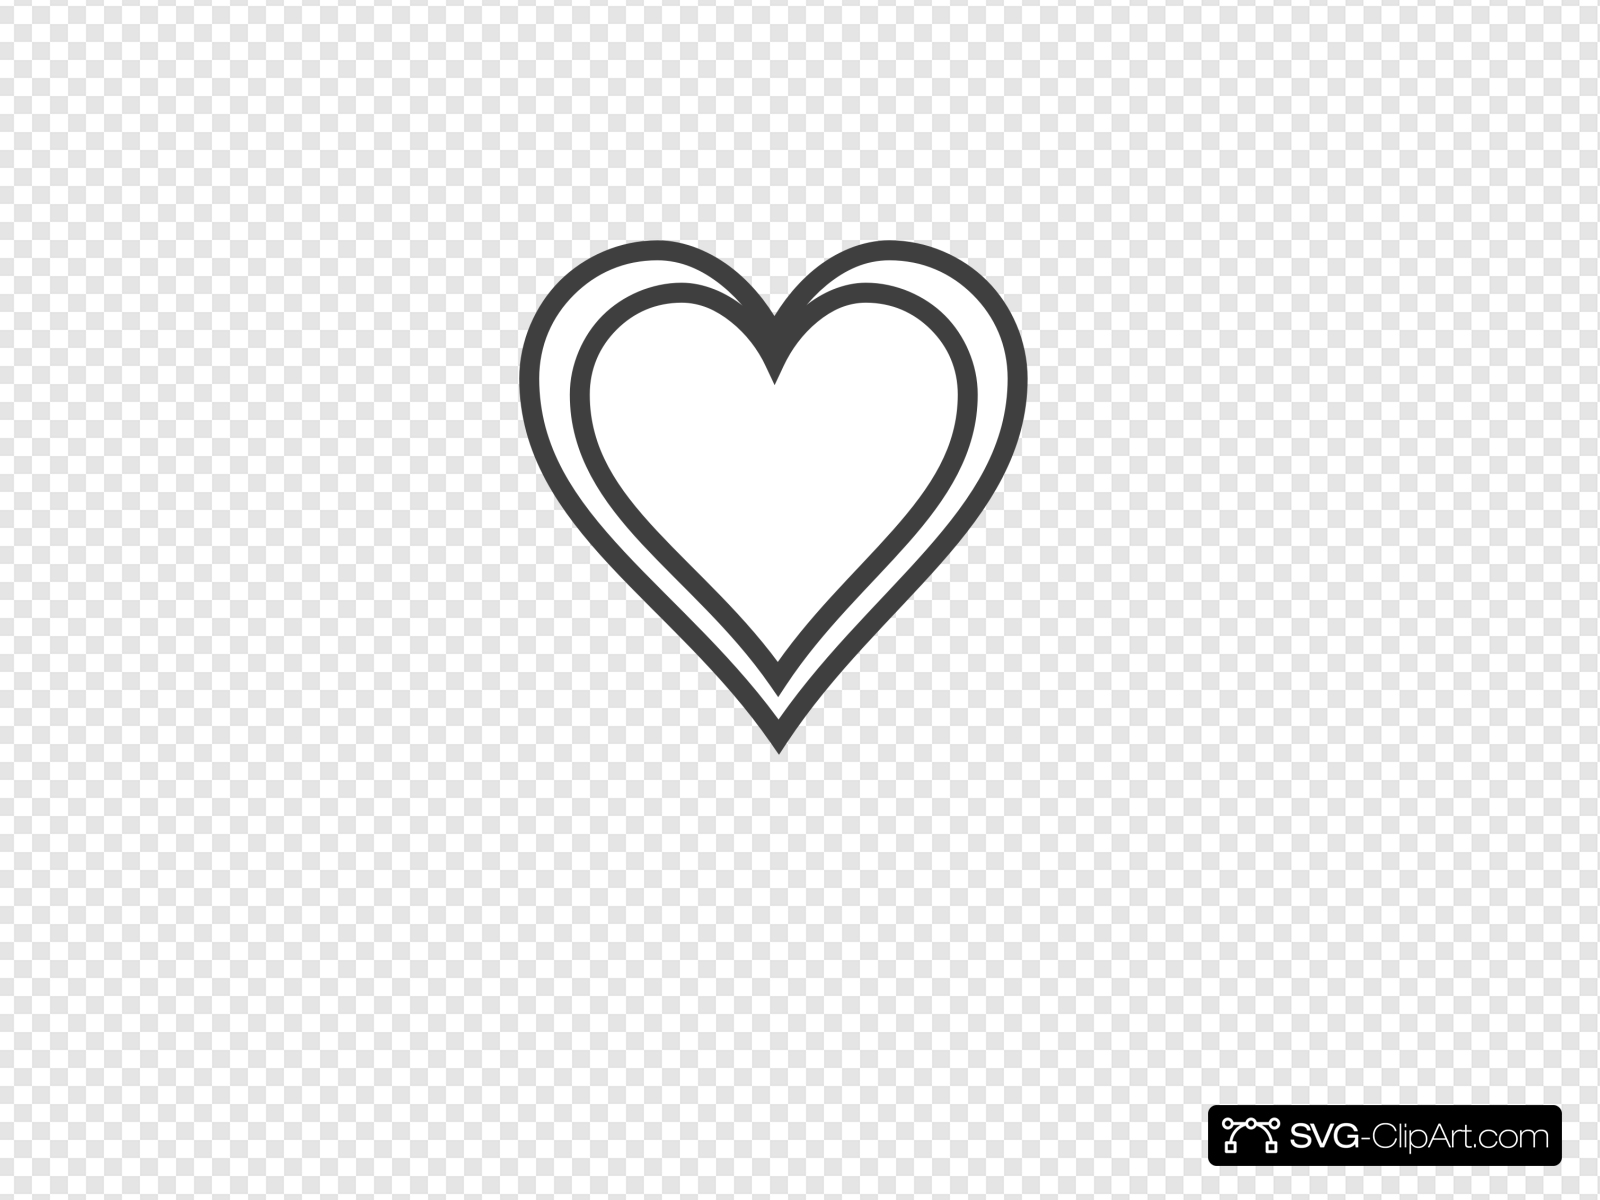 Double Heart Outline Clip art, Icon and SVG